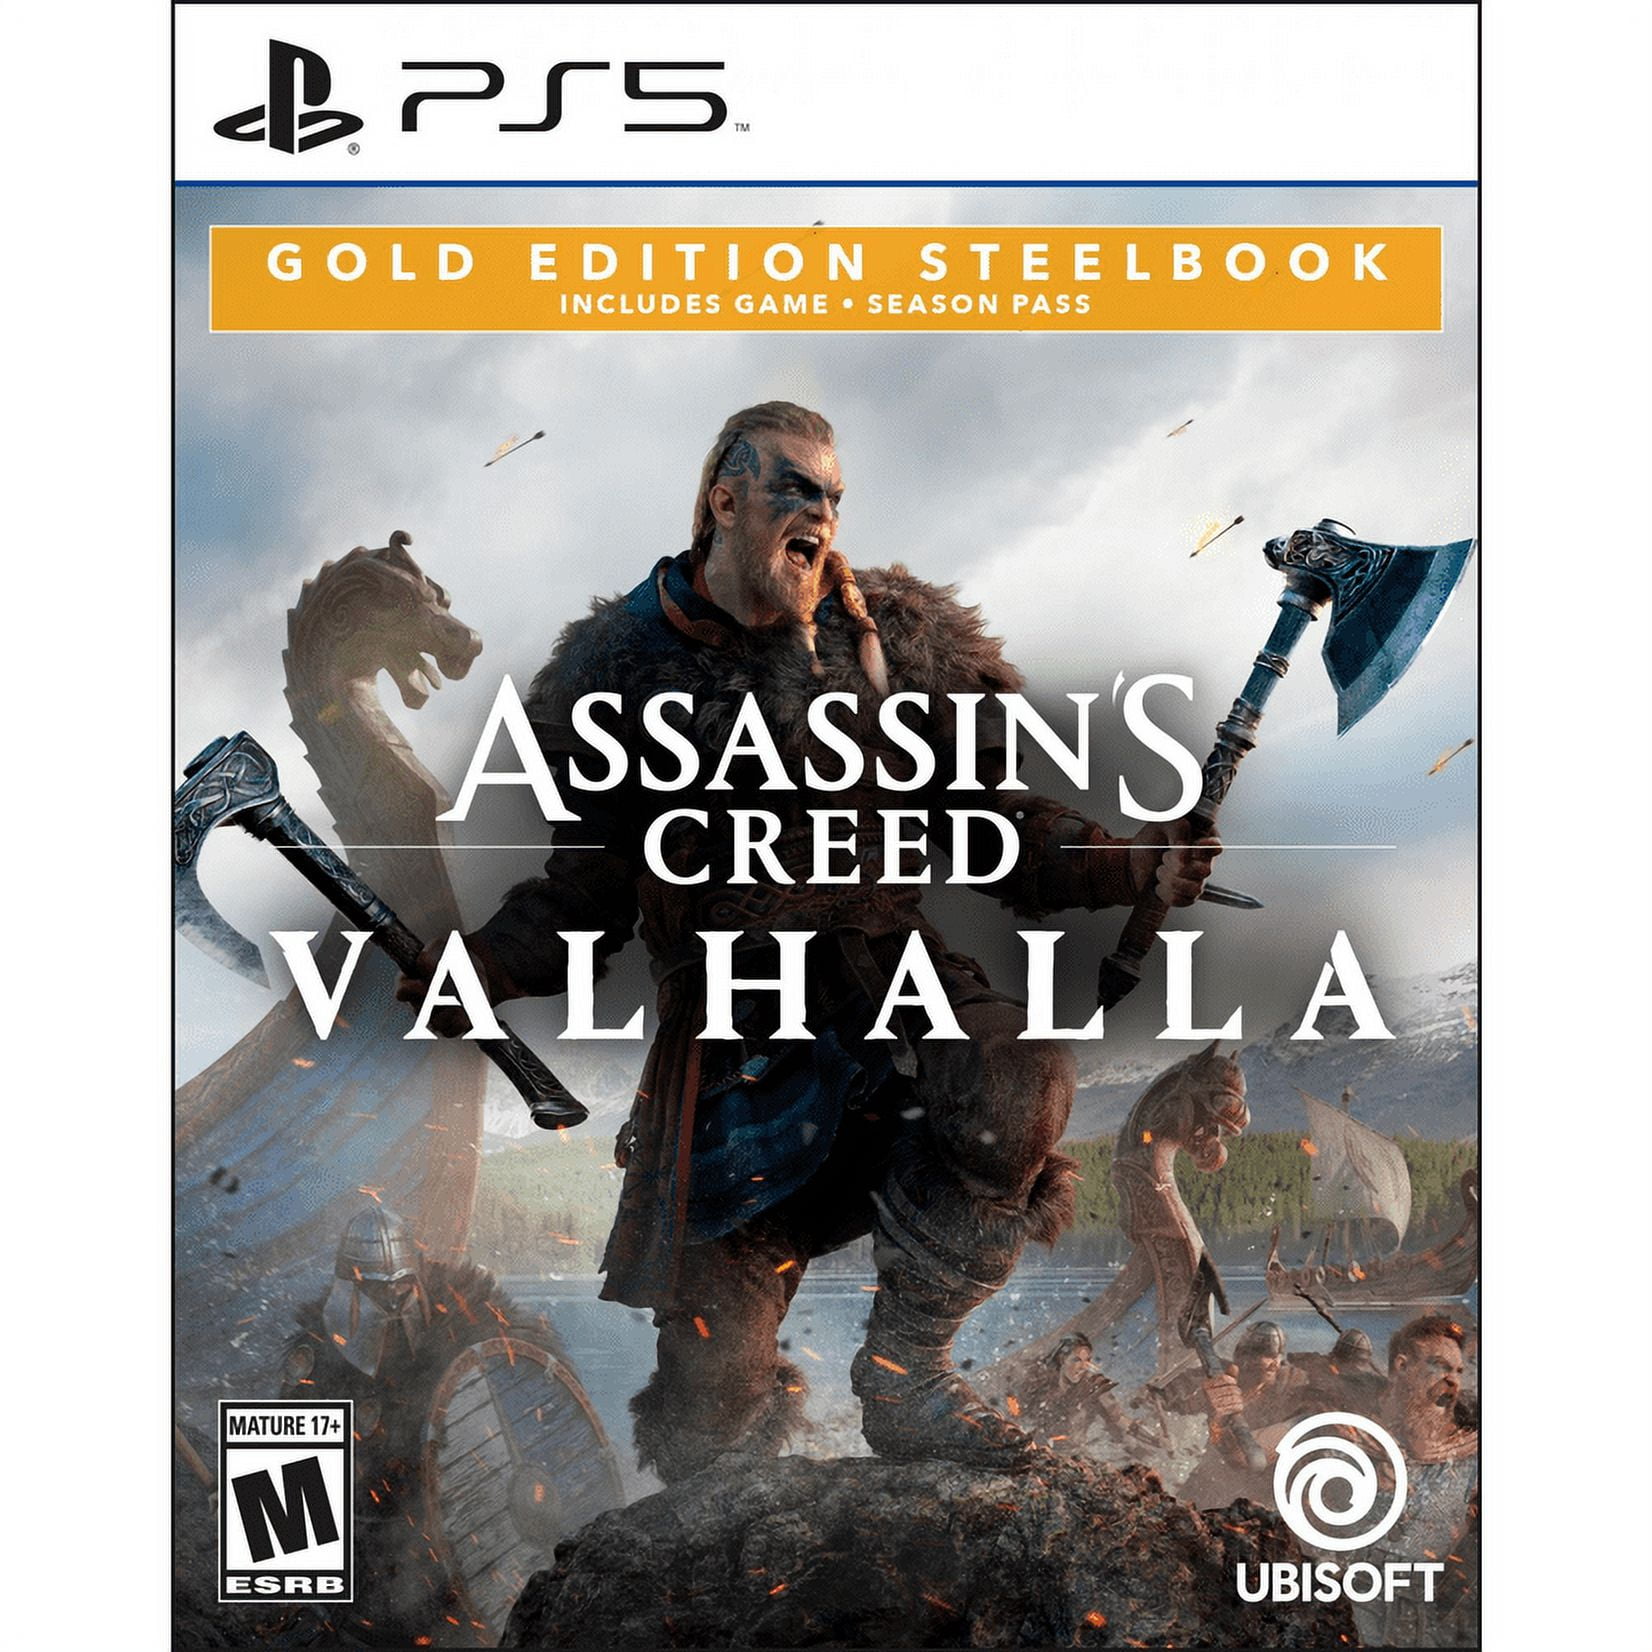 Assassin's Creed Valhalla Season Pass for PC Buy